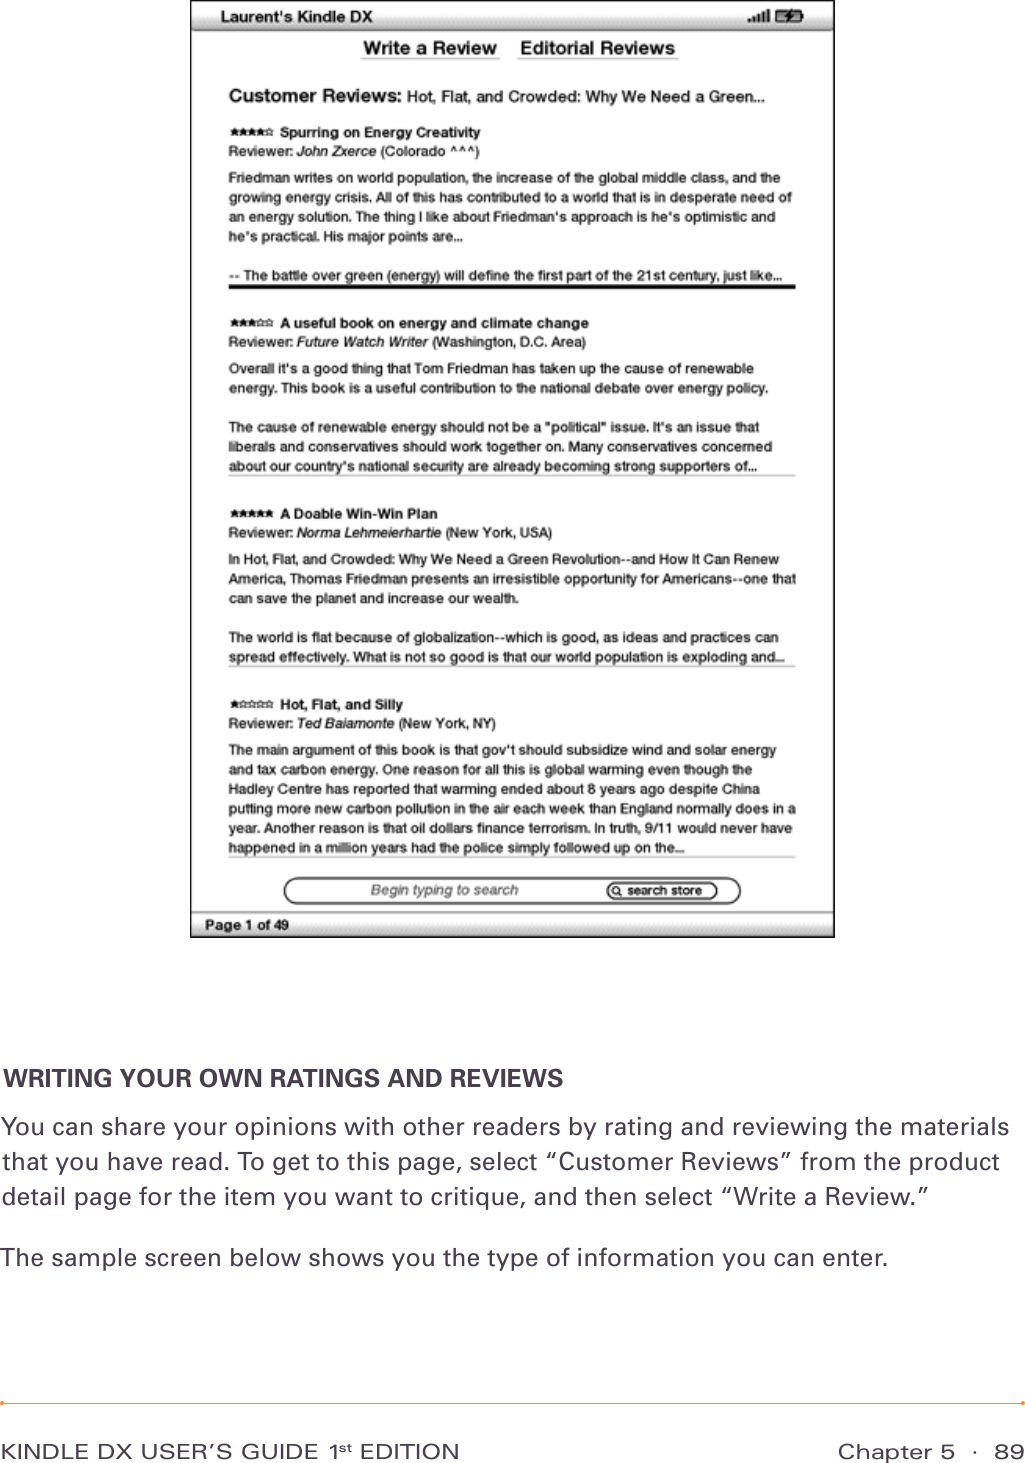 Chapter 5  ·  89KINDLE DX USER’S GUIDE 1st EDITIONWRITING YOUR OWN RATINGS AND REVIEWSYou can share your opinions with other readers by rating and reviewing the materials that you have read. To get to this page, select “Customer Reviews” from the product detail page for the item you want to critique, and then select “Write a Review.”The sample screen below shows you the type of information you can enter.